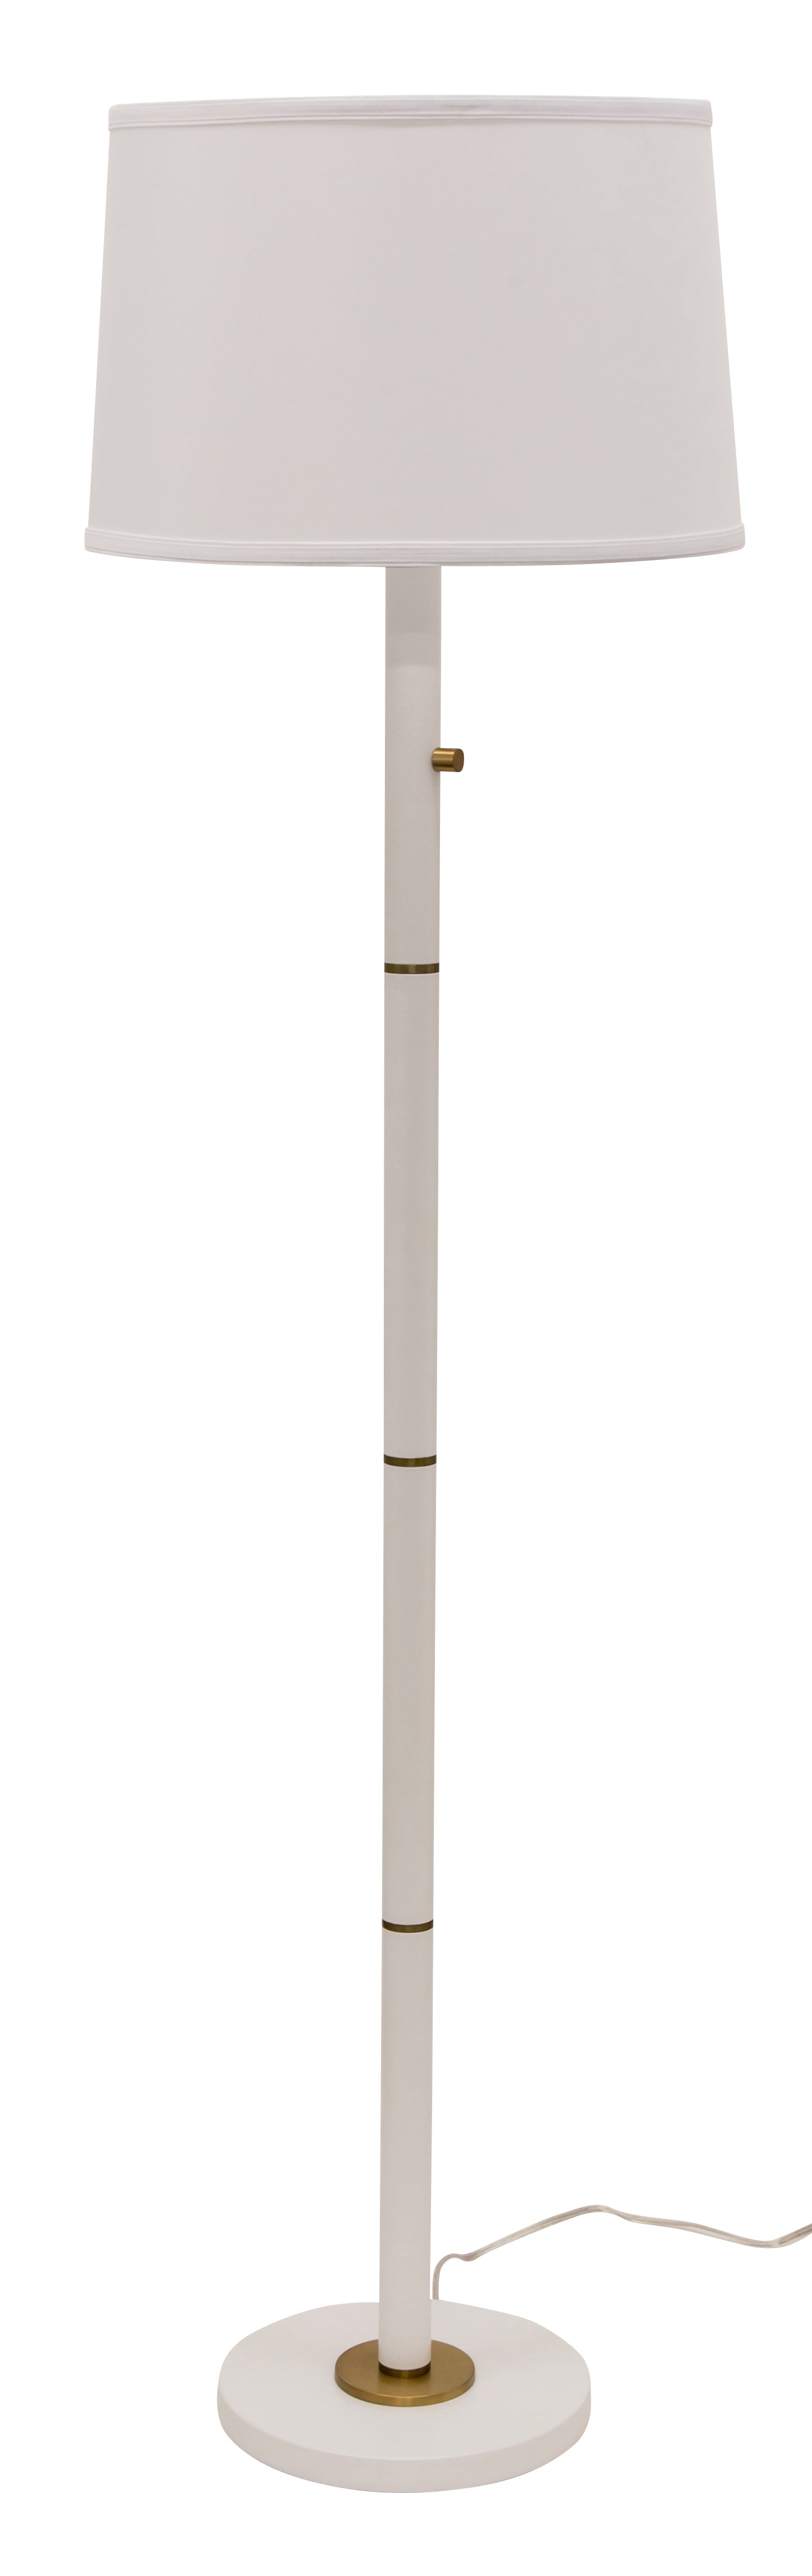 House of Troy Rupert three way floor lamp in white with weathered brass accents RU703-WT